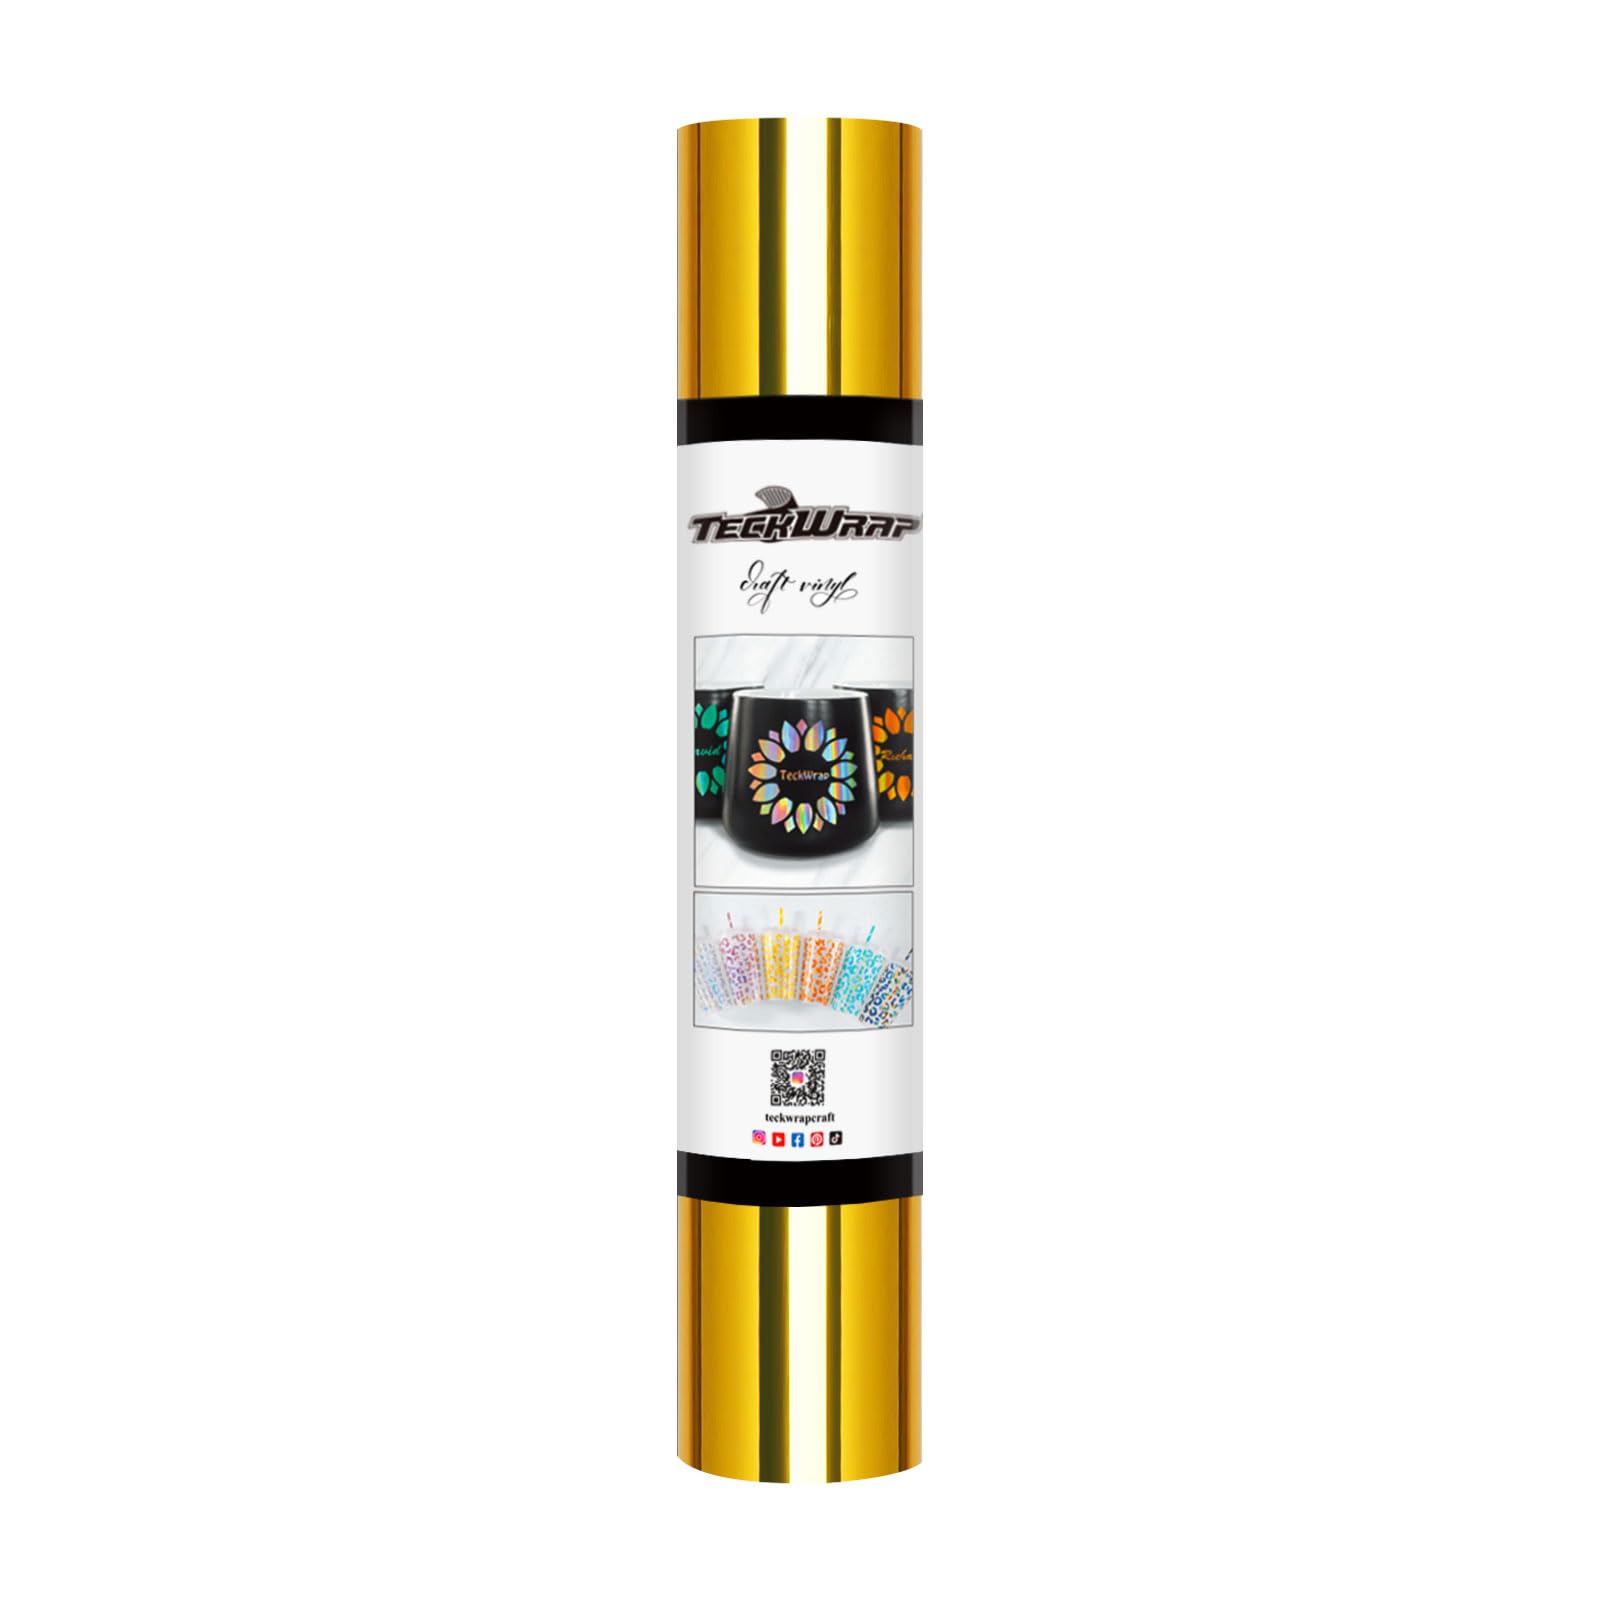 TECKWRAP Chrome Vinyl Bubble Free Metallic Permanent Adhesive Craft Vinyl with Air Channels 1ftx5ft, Gold